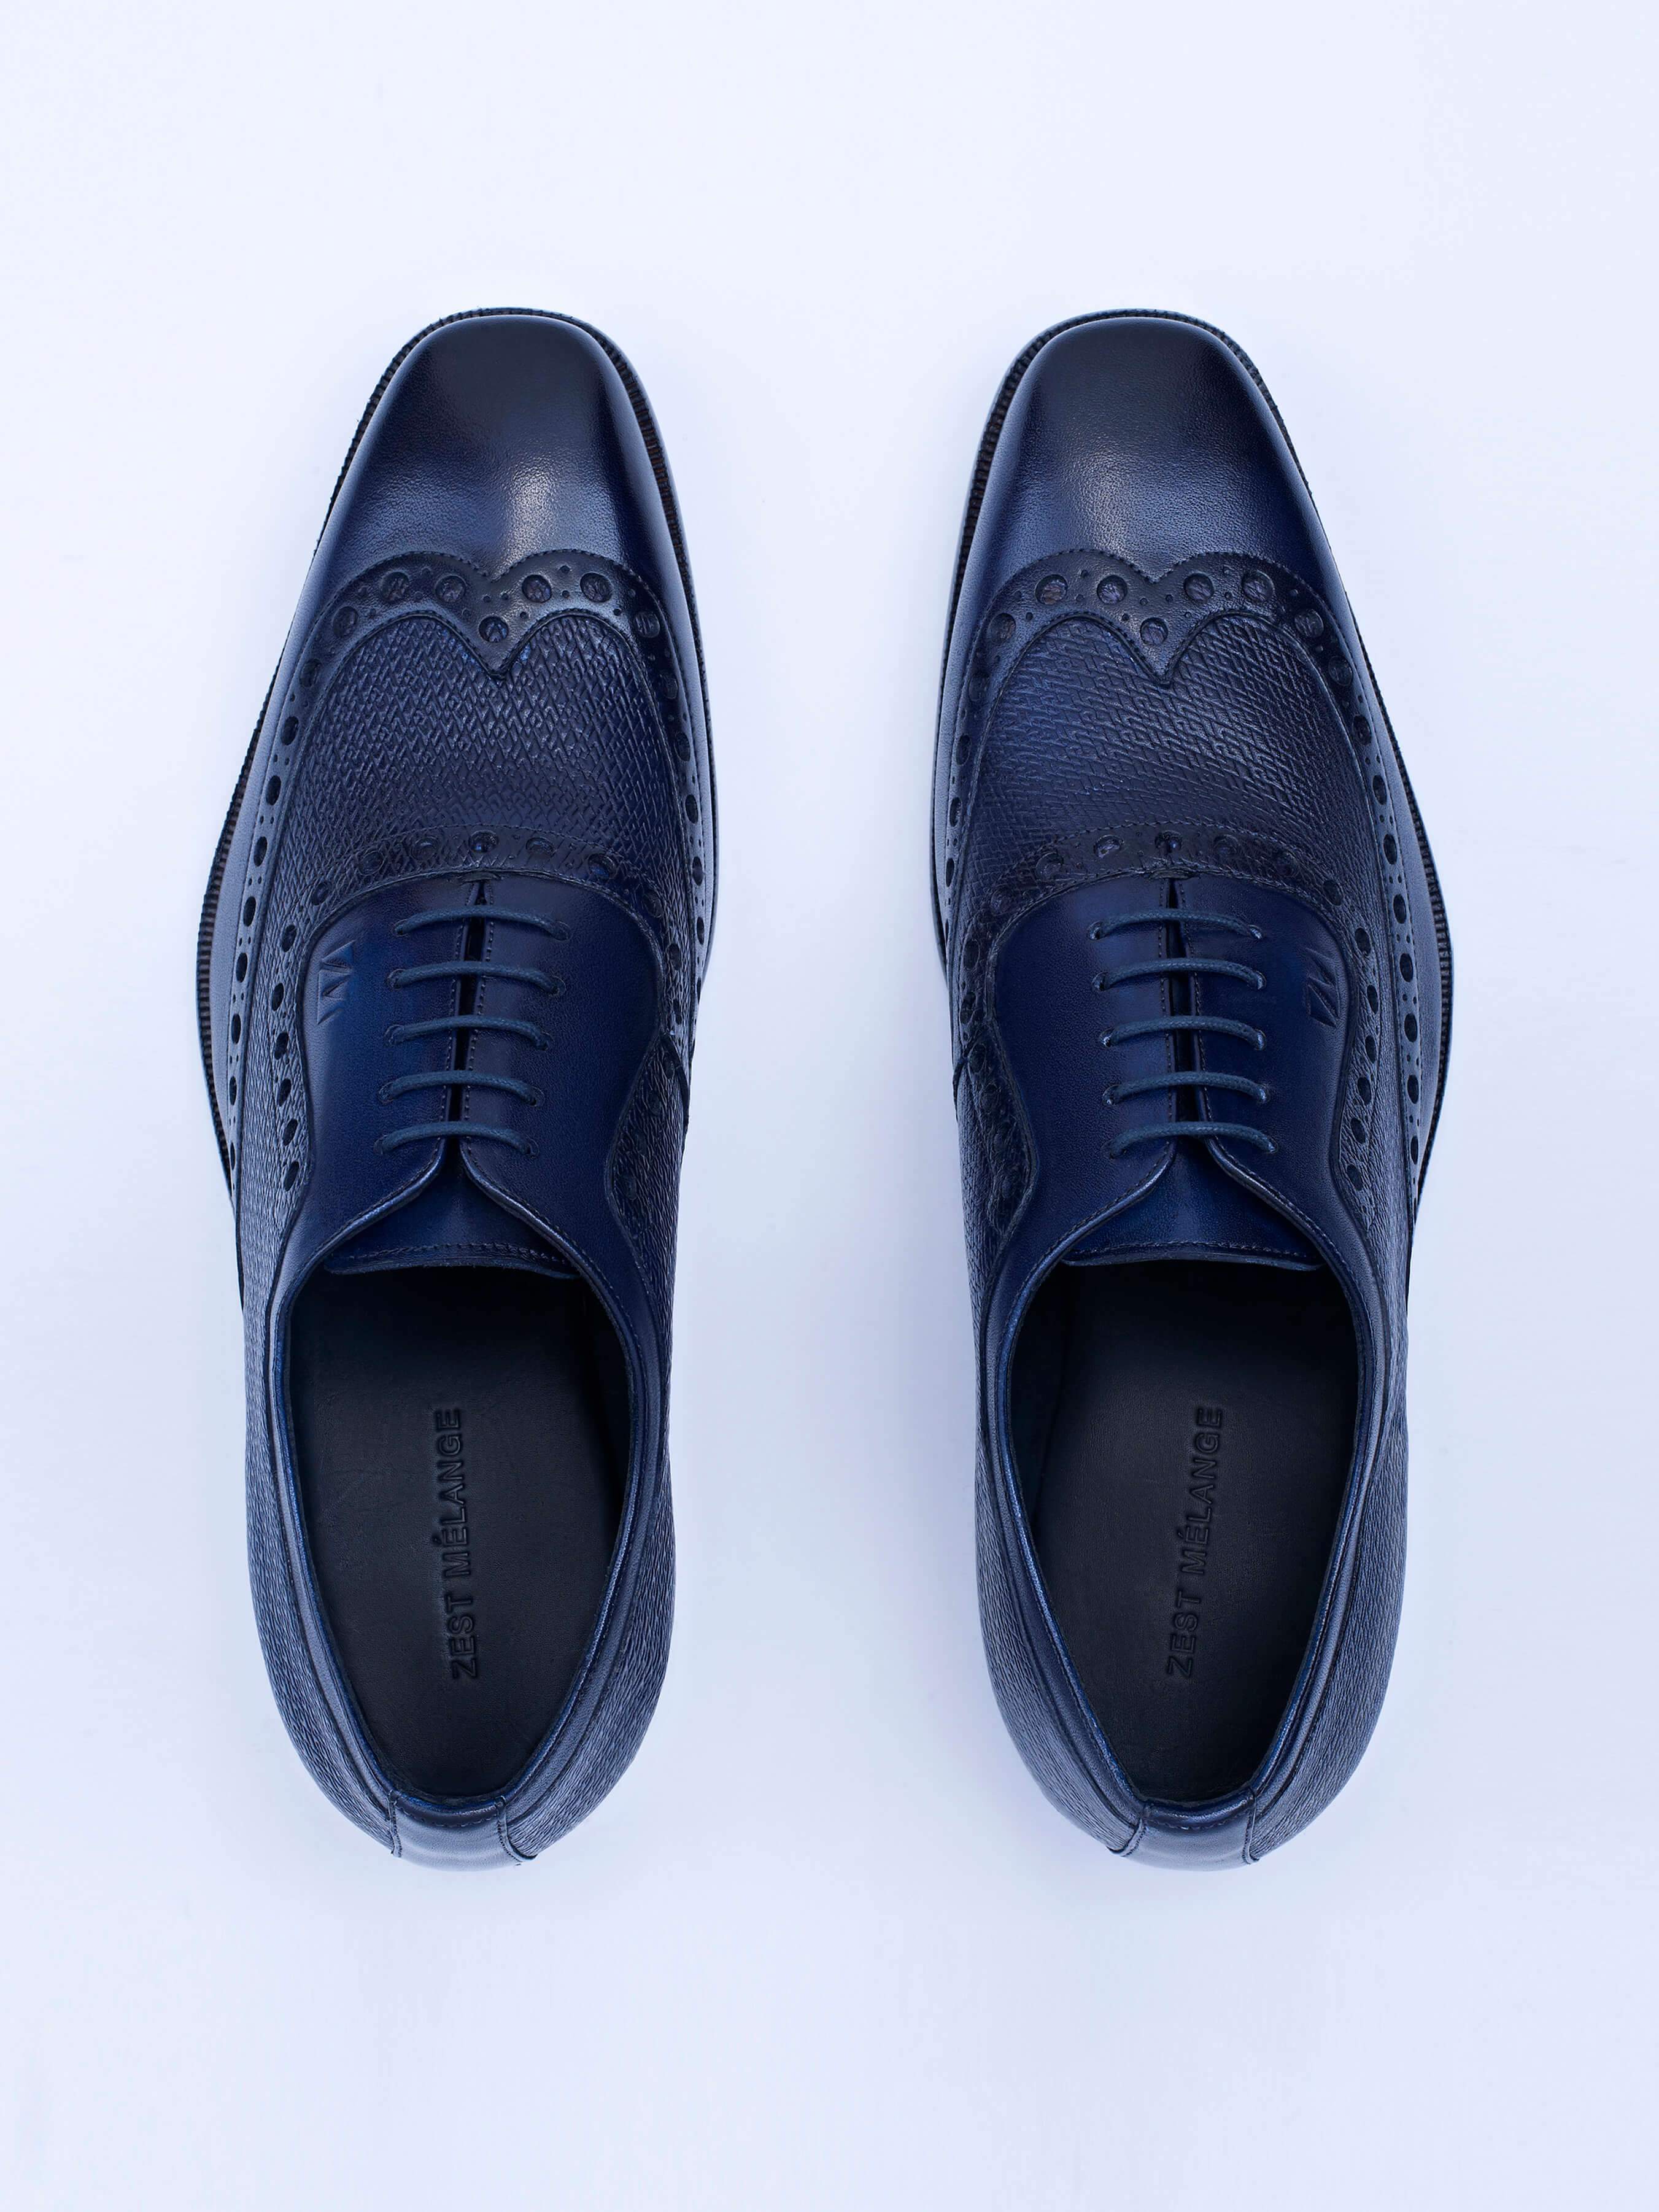 Oxford Lace Up Shoes With Broguing & Zm Embossed Leather Detail - Zest Mélange 